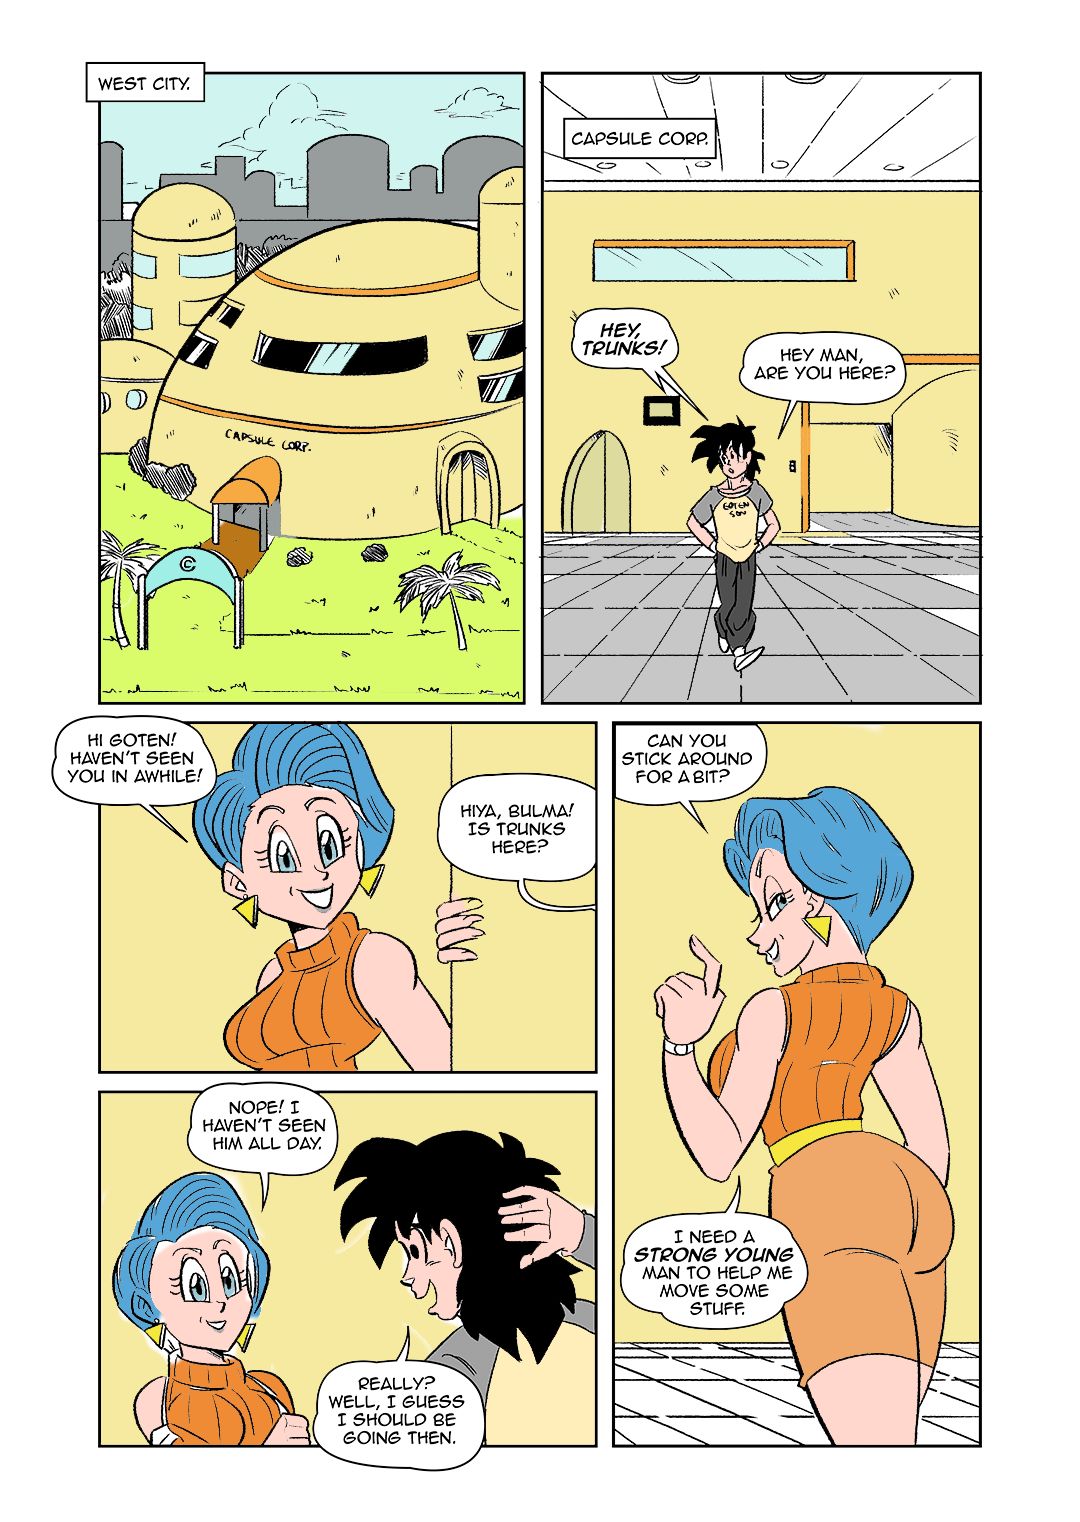 The Switch Up (Dragon Ball Z) by Funsexydb page 4